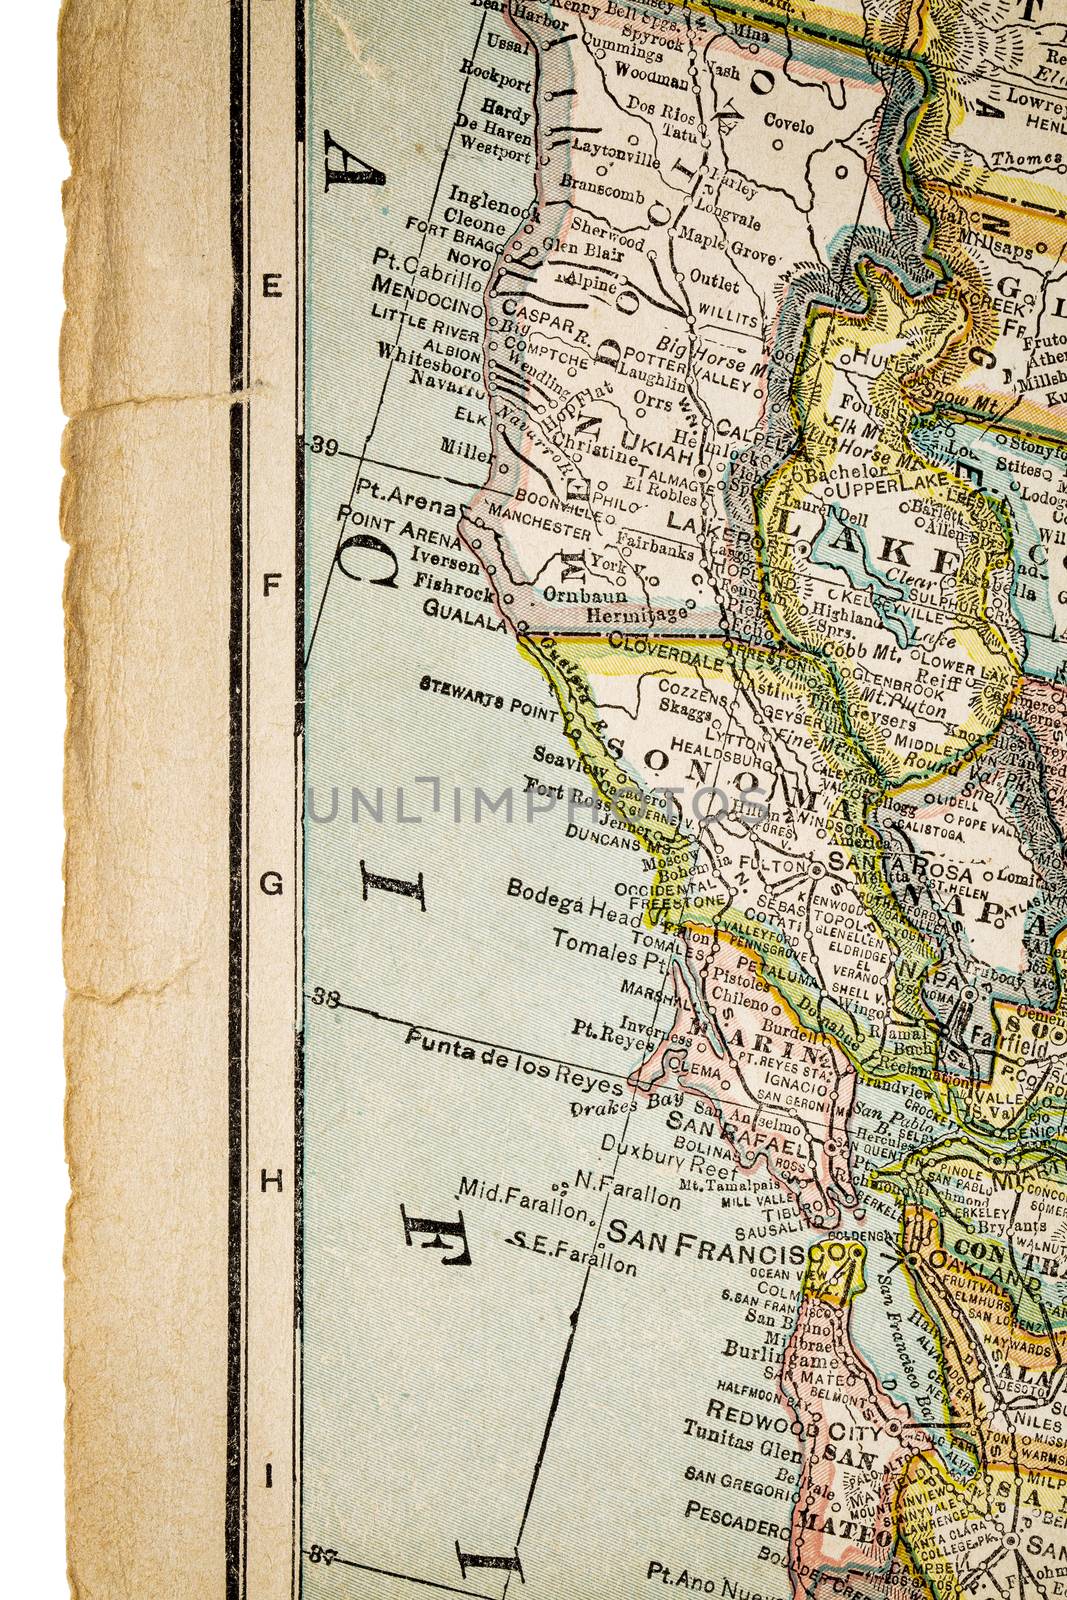 north California and San Francisco  on vintage 1920s map with rough worn out edge (printed in 1926 in New International Atlas of the World - copyrights expired)